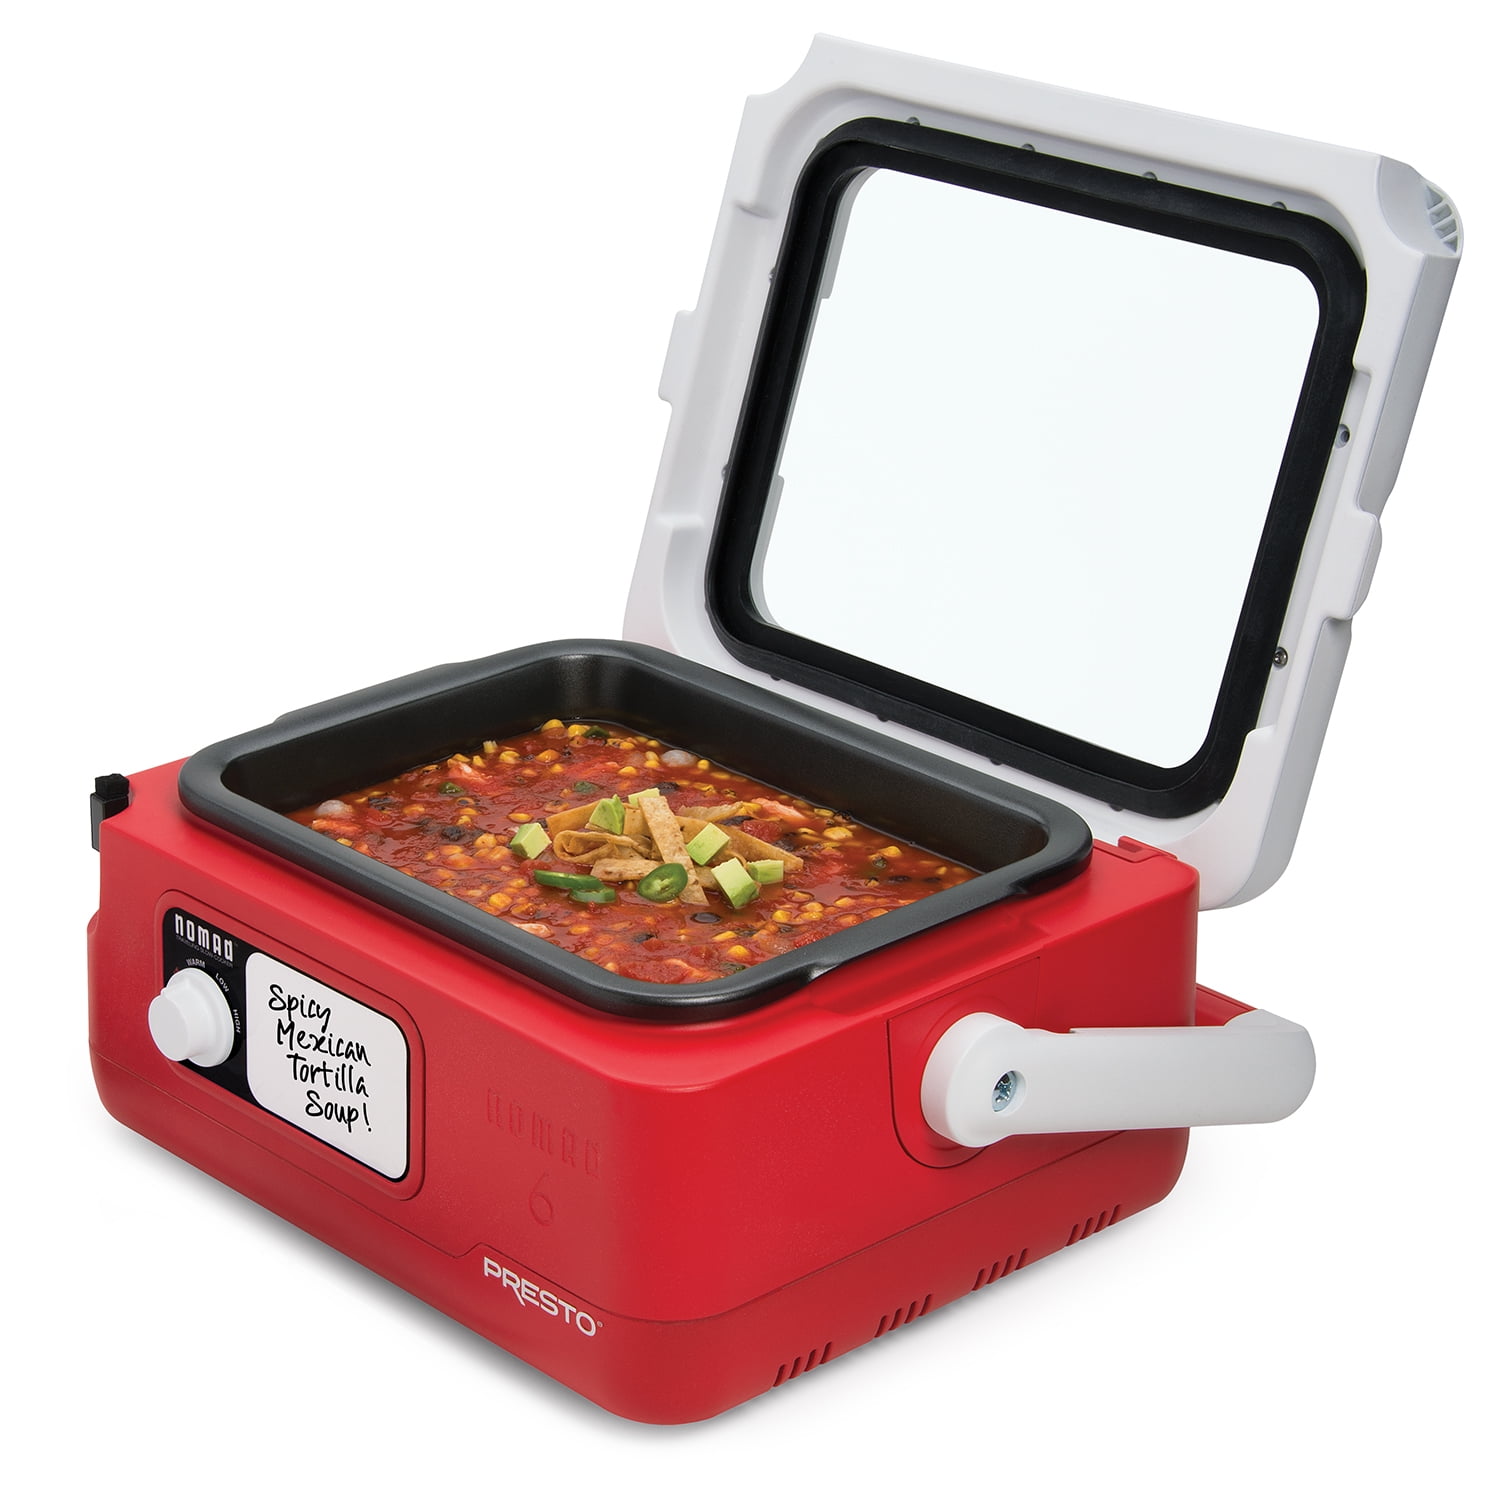 6011 Slow Cooker, 7.4 x 12.5 x 15.9, Red & 06015 Nomad Mason